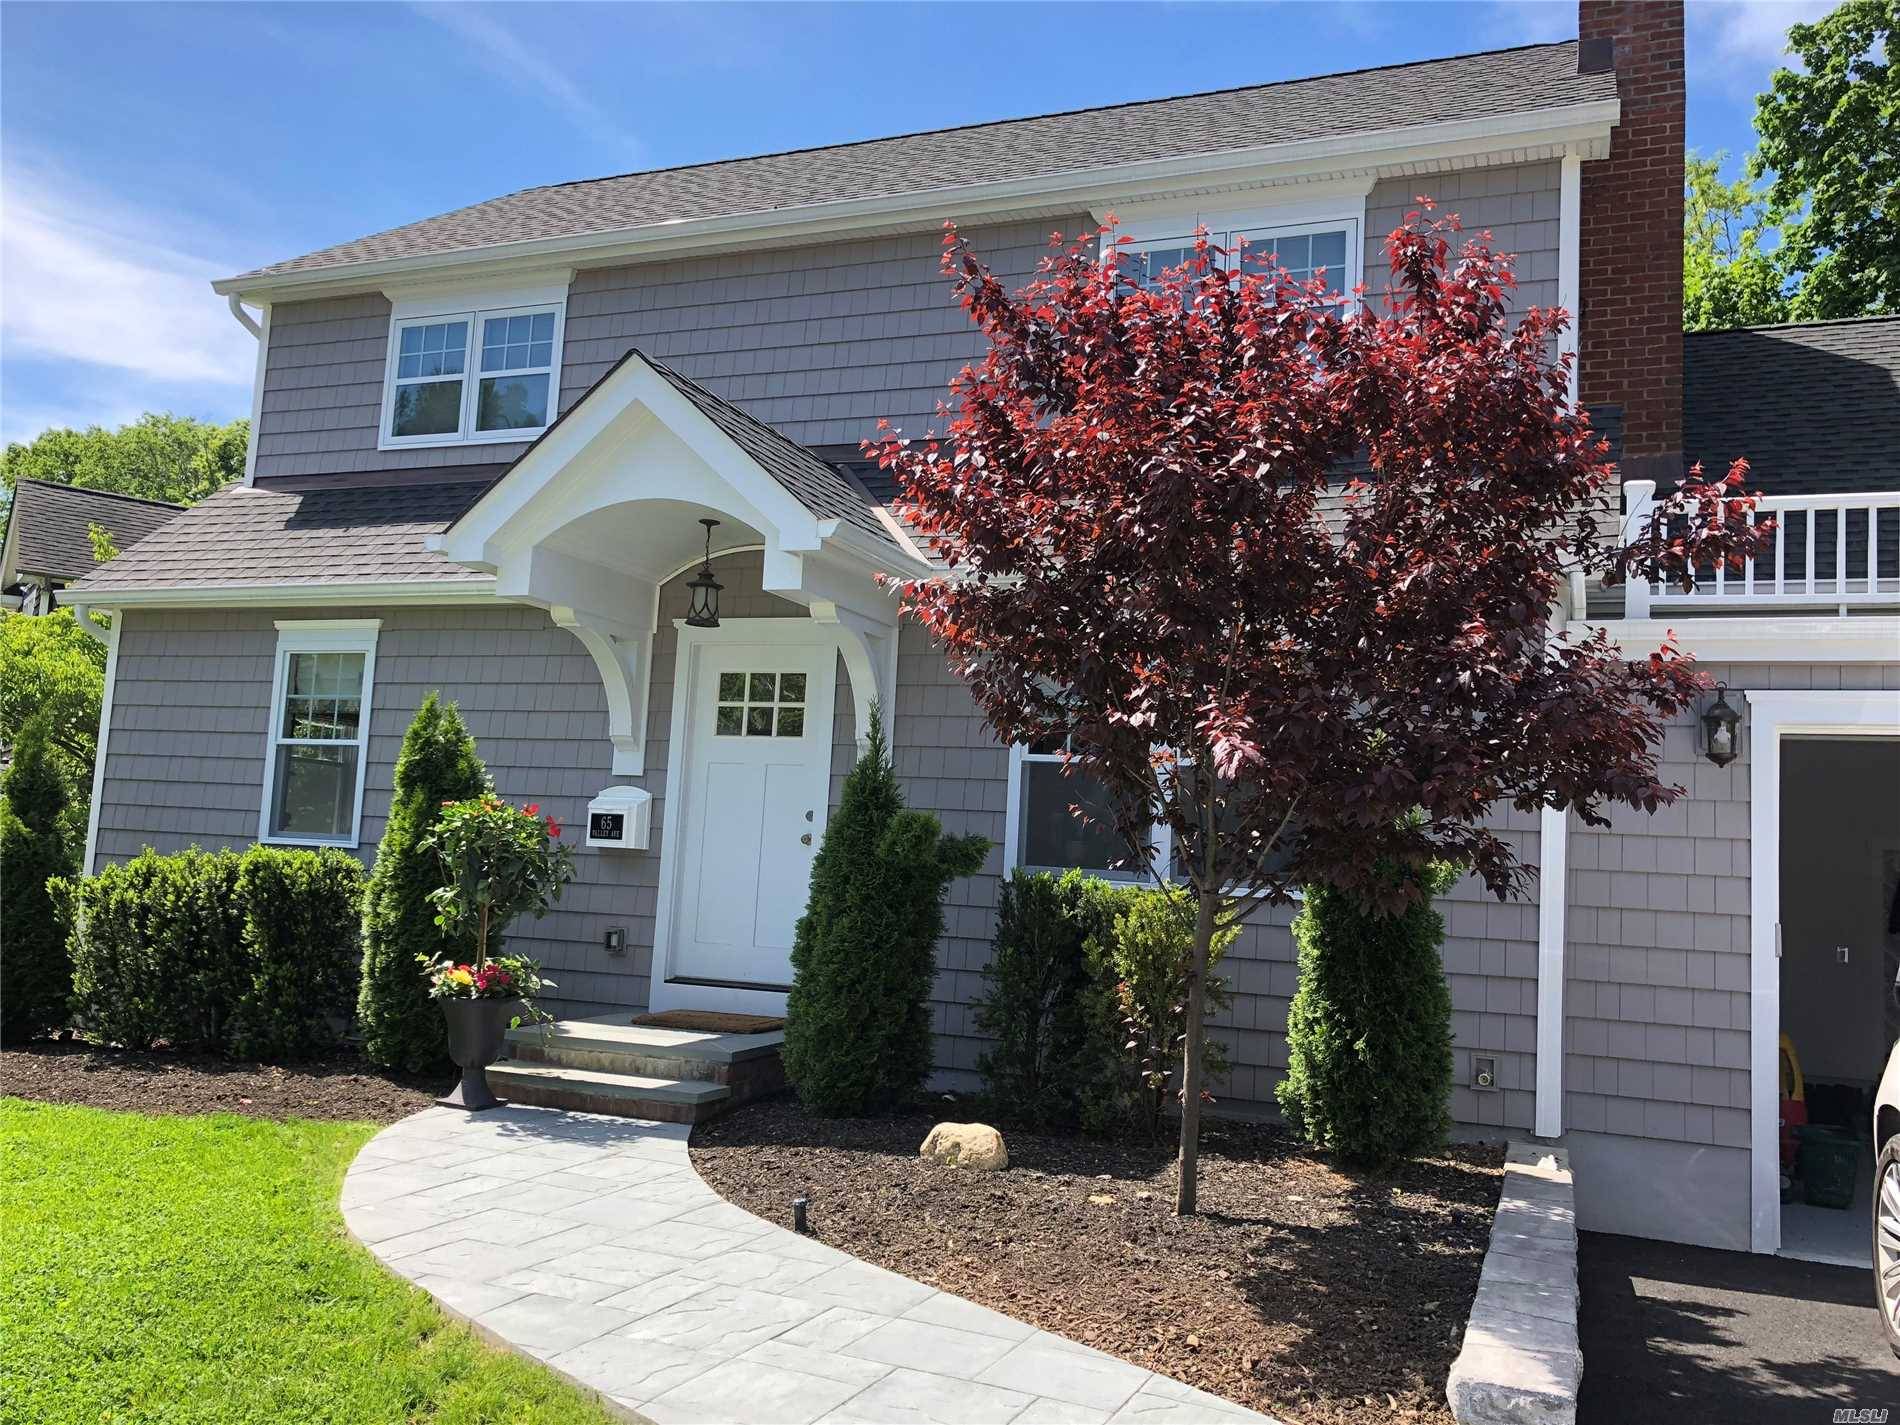 Adorable, Fully Furnished, Summer Rental On A Beautiful Block In Locust Valley.